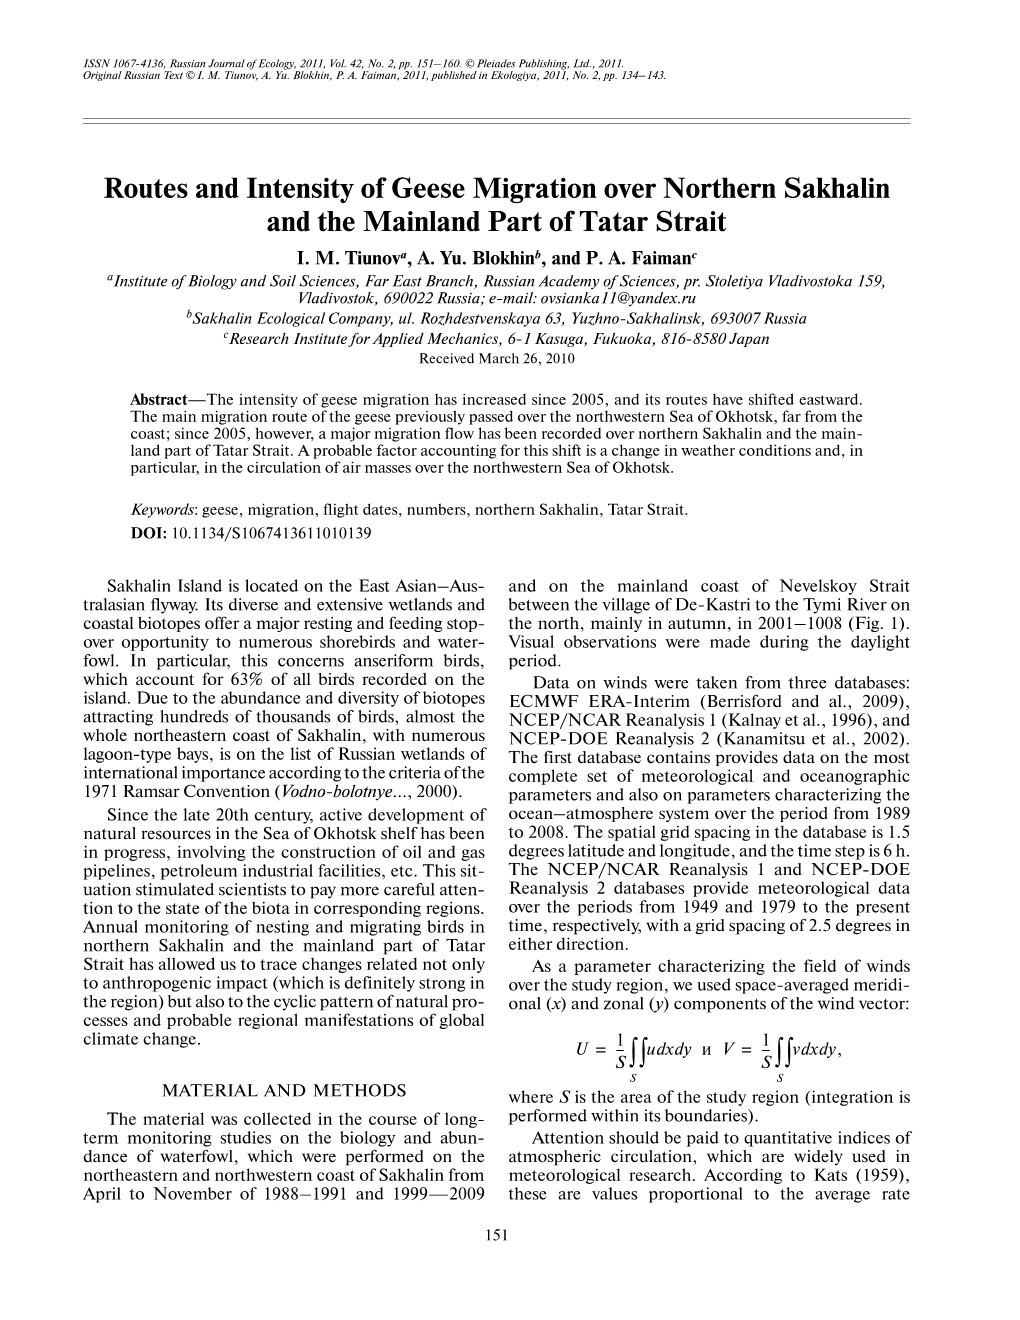 Routes and Intensity of Geese Migration Over Northern Sakhalin and the Mainland Part of Tatar Strait I